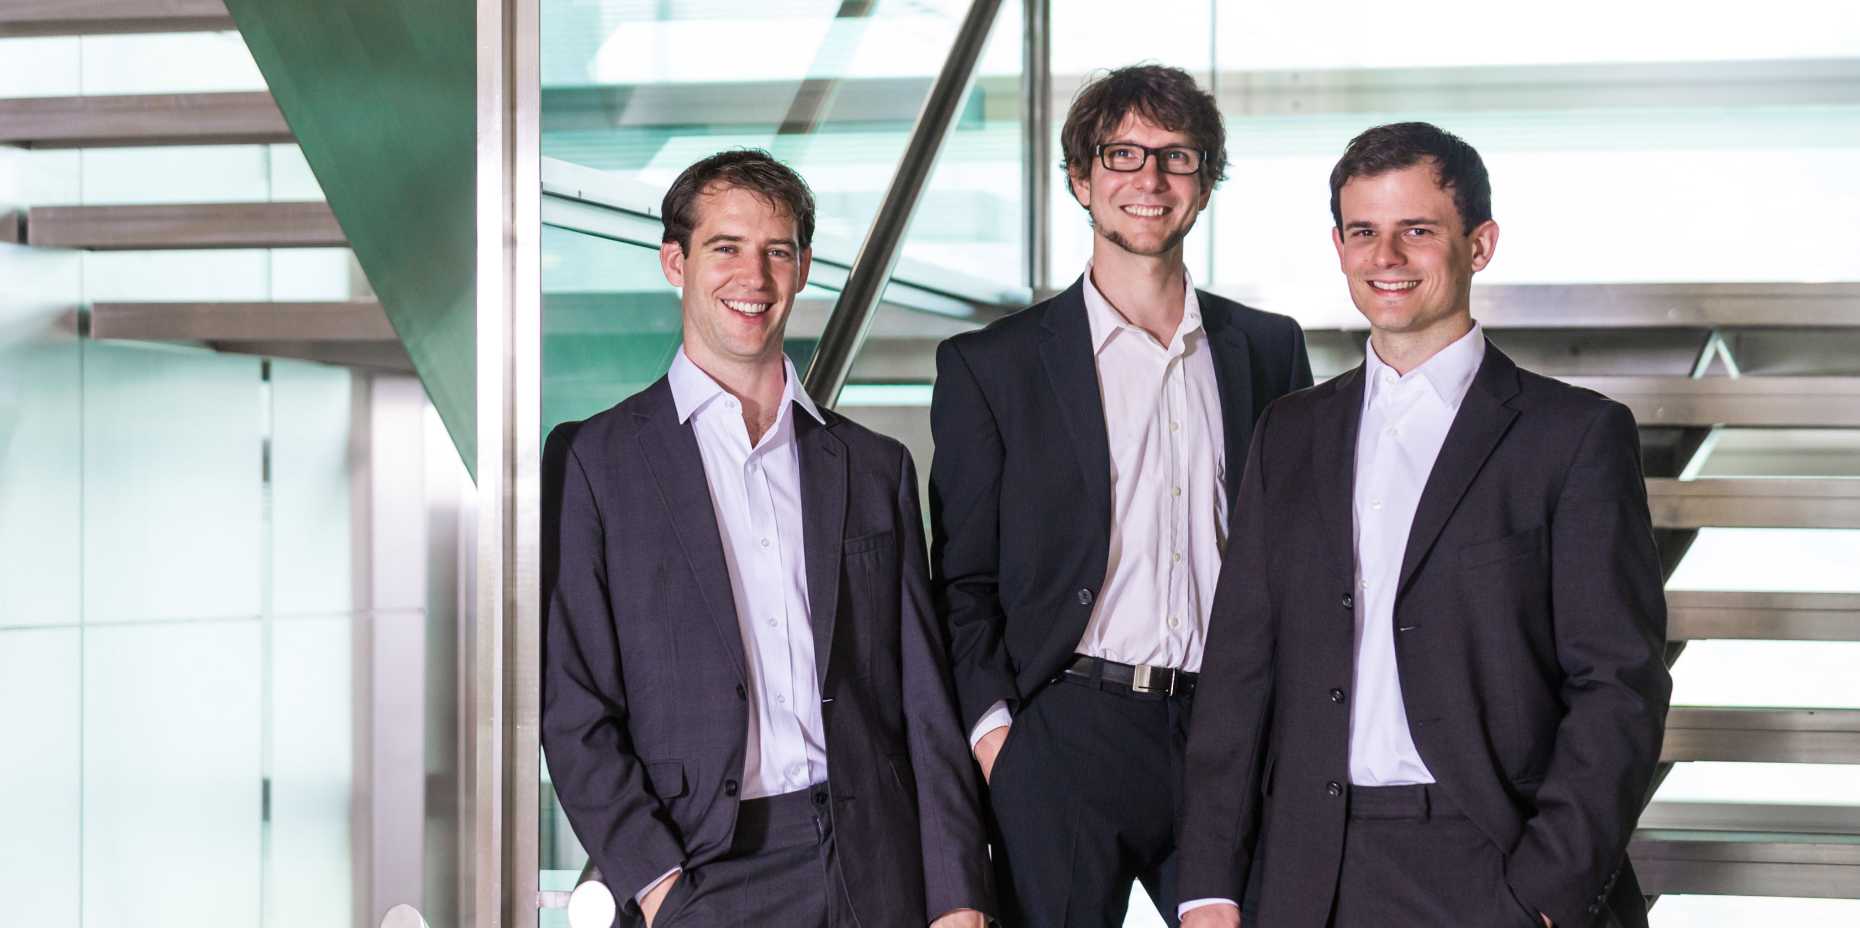 The founders of the ETH spin-off IRsweep: Markus Mangold, Andreas Hugi and Markus Geiser (left to right) (Photography: IRsweep)